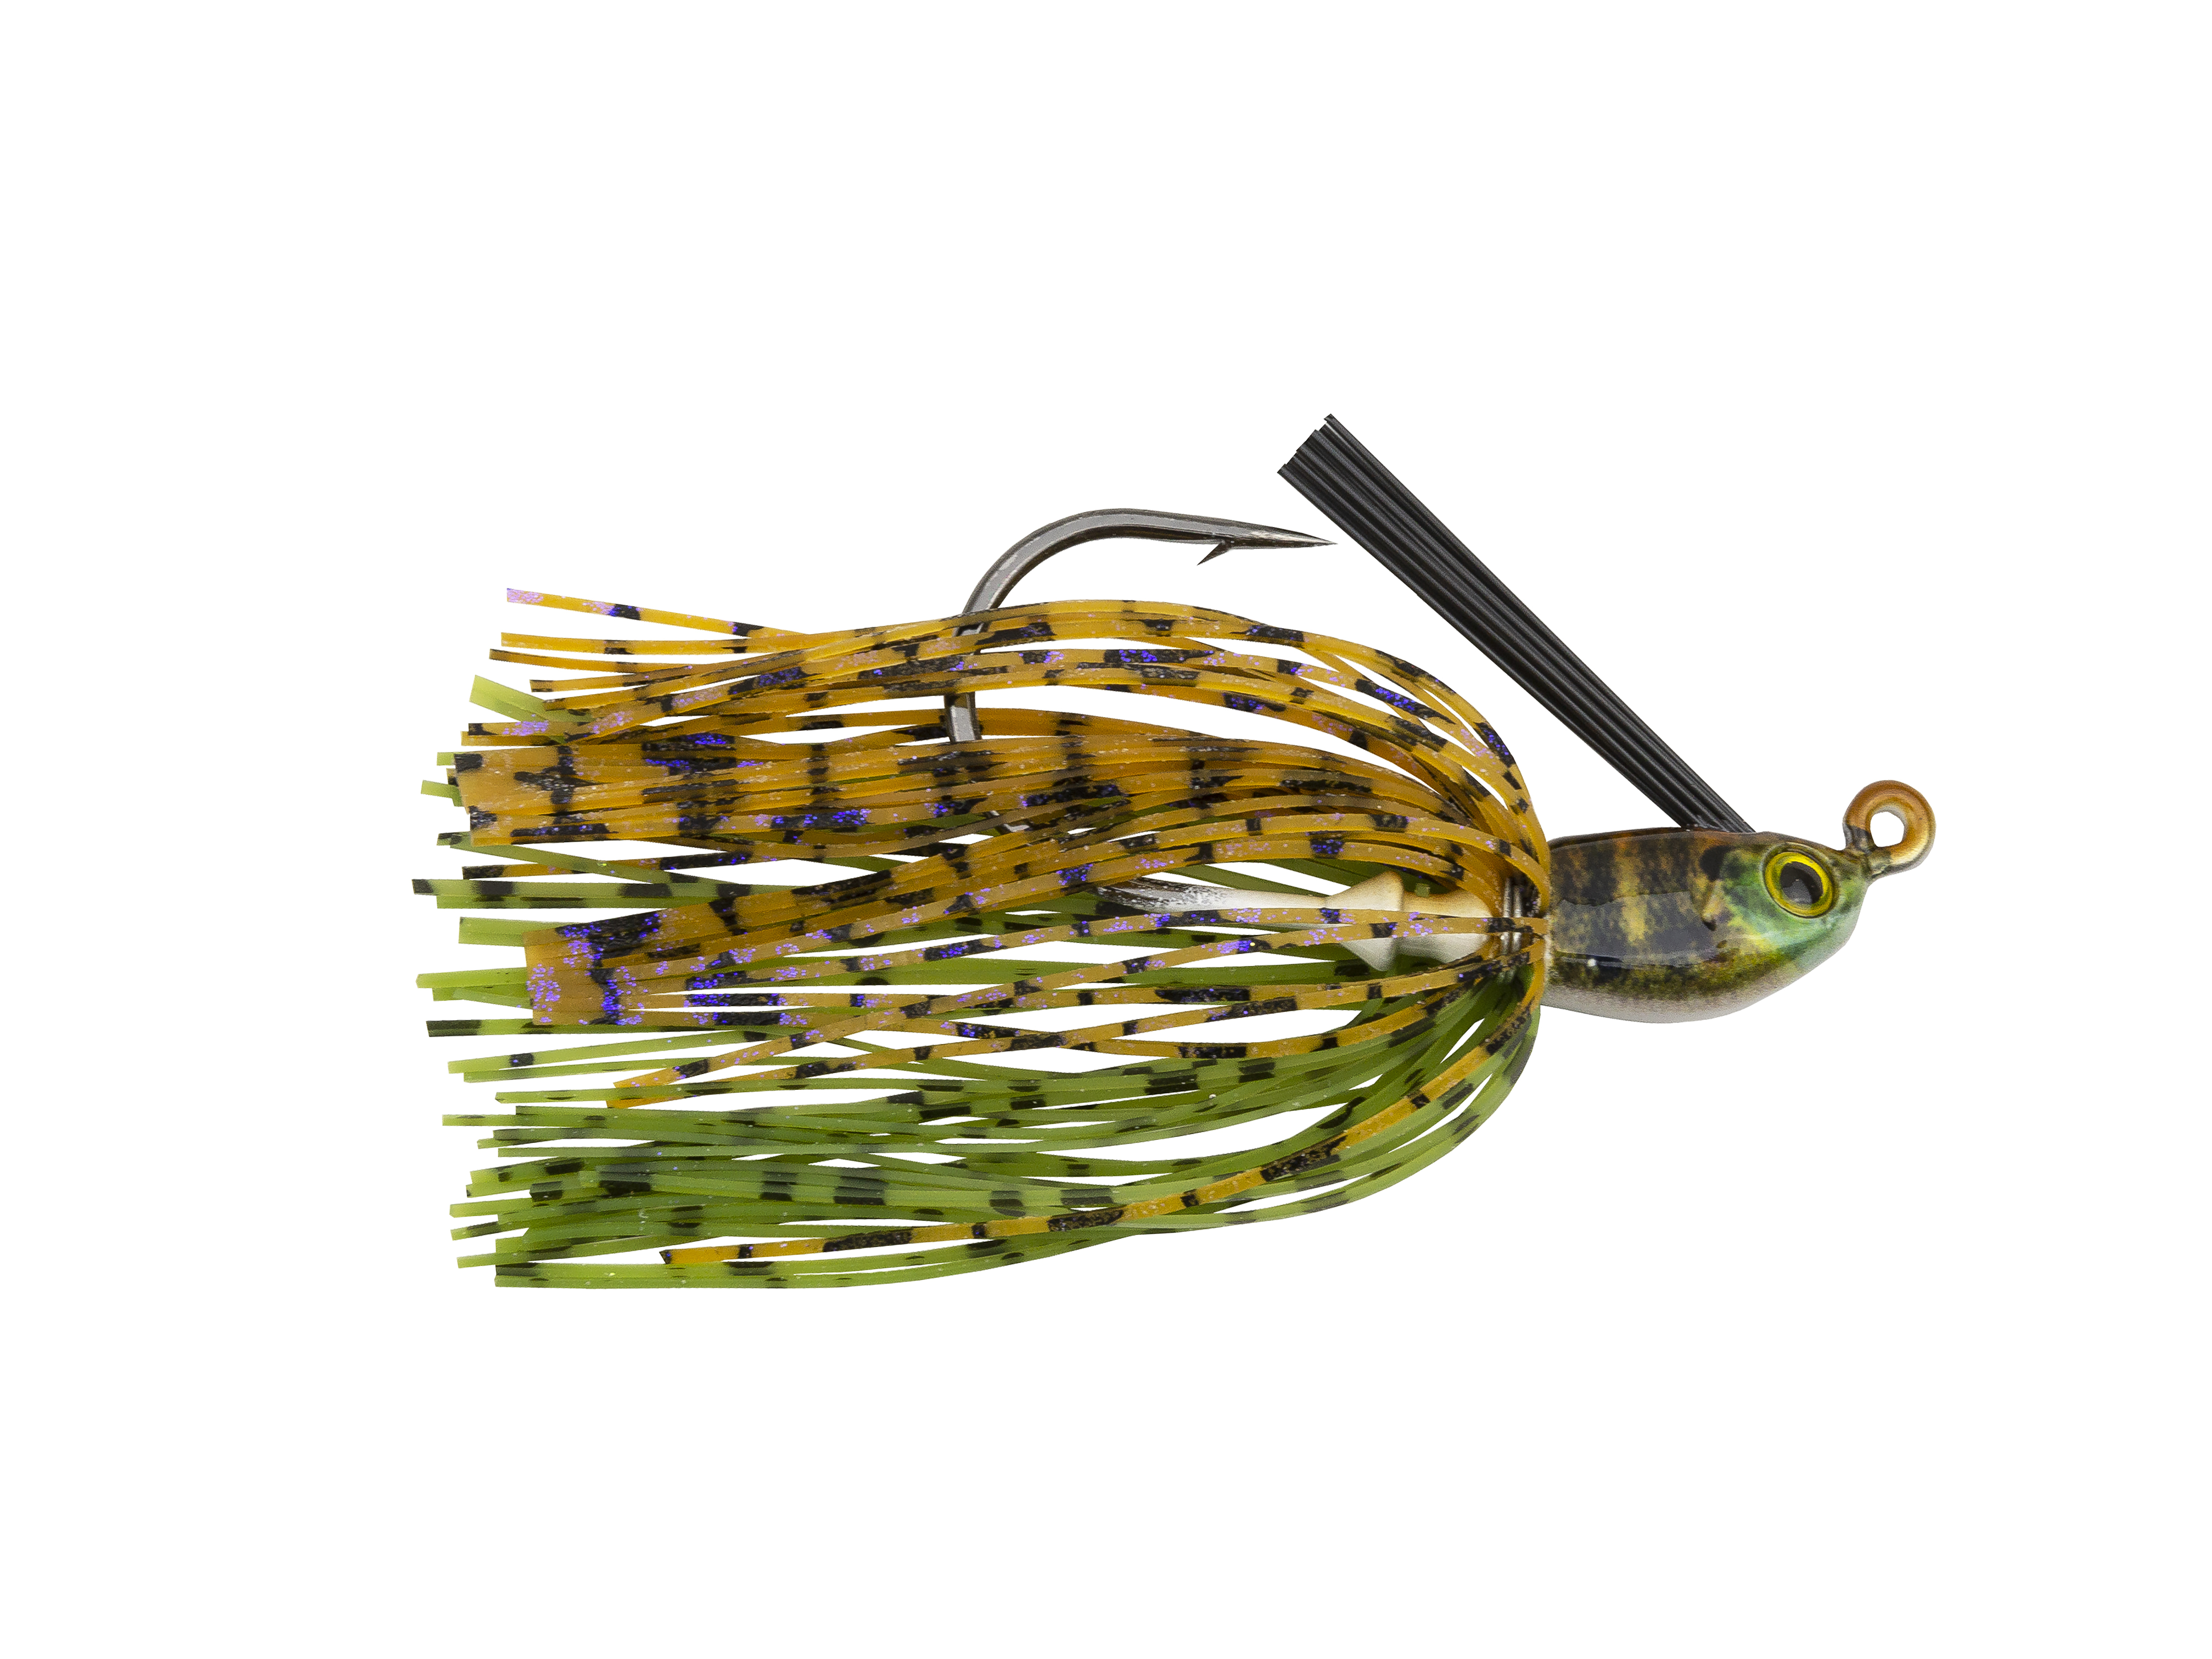 Mua Lunkerhunt, Walleye Jigs Best Weedless Skirt Jig, Swim Jig Unique  Bass Lures Jig, Durable Top Water Bass Fishing Lures with (Wired) Jig  Skirts for Bass Fishing